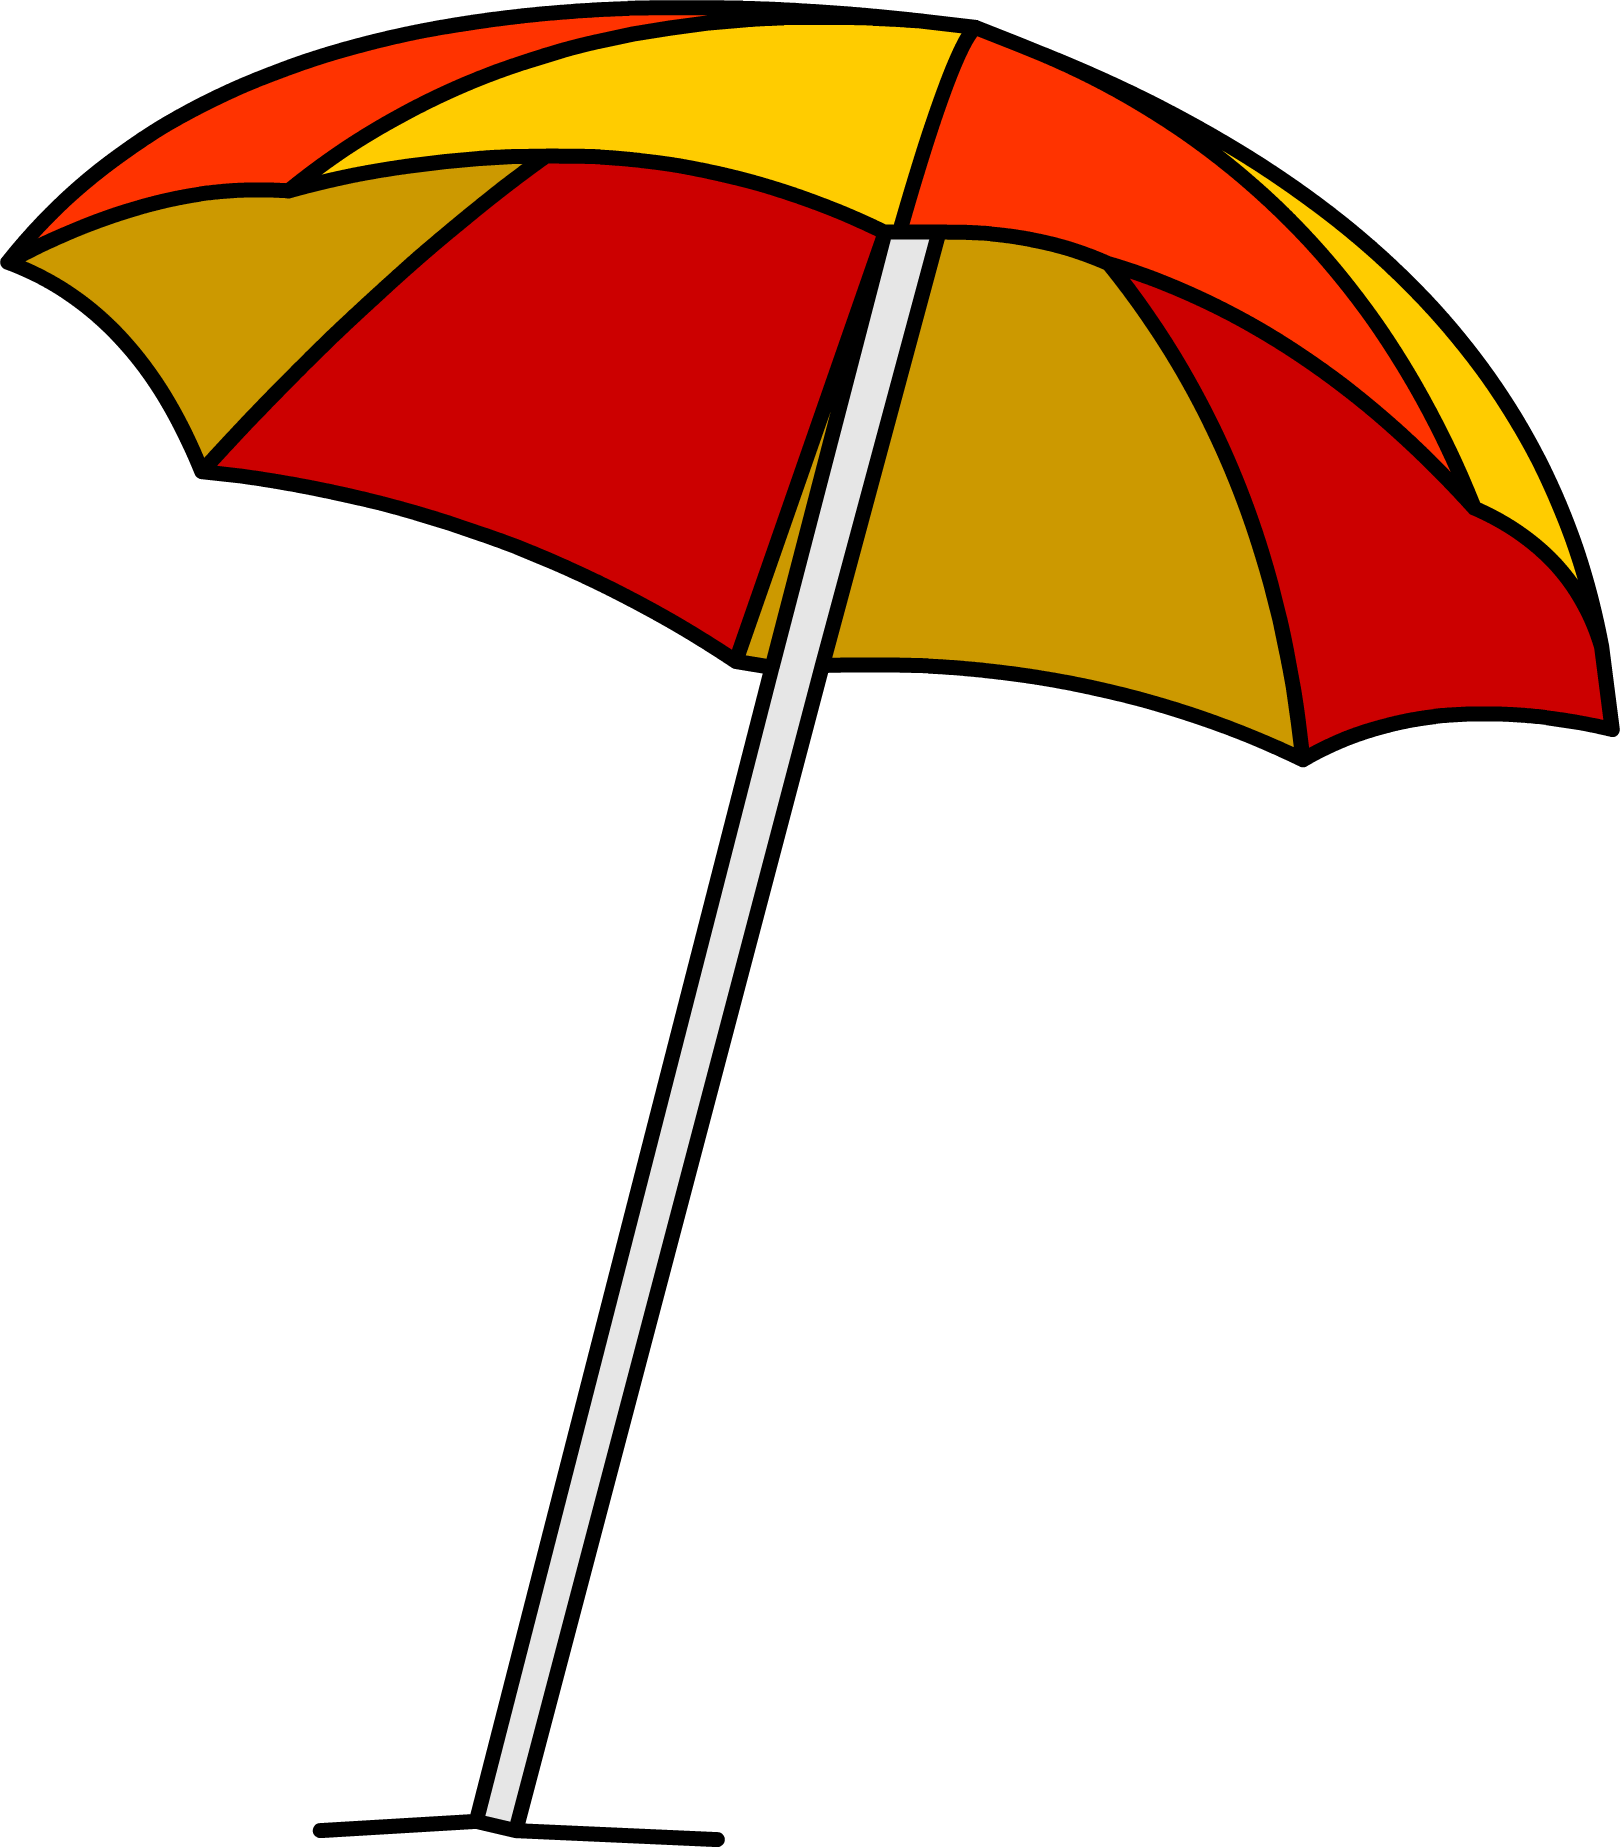 Image - Umbrella.PNG | Club Penguin Wiki | Fandom powered by Wikia